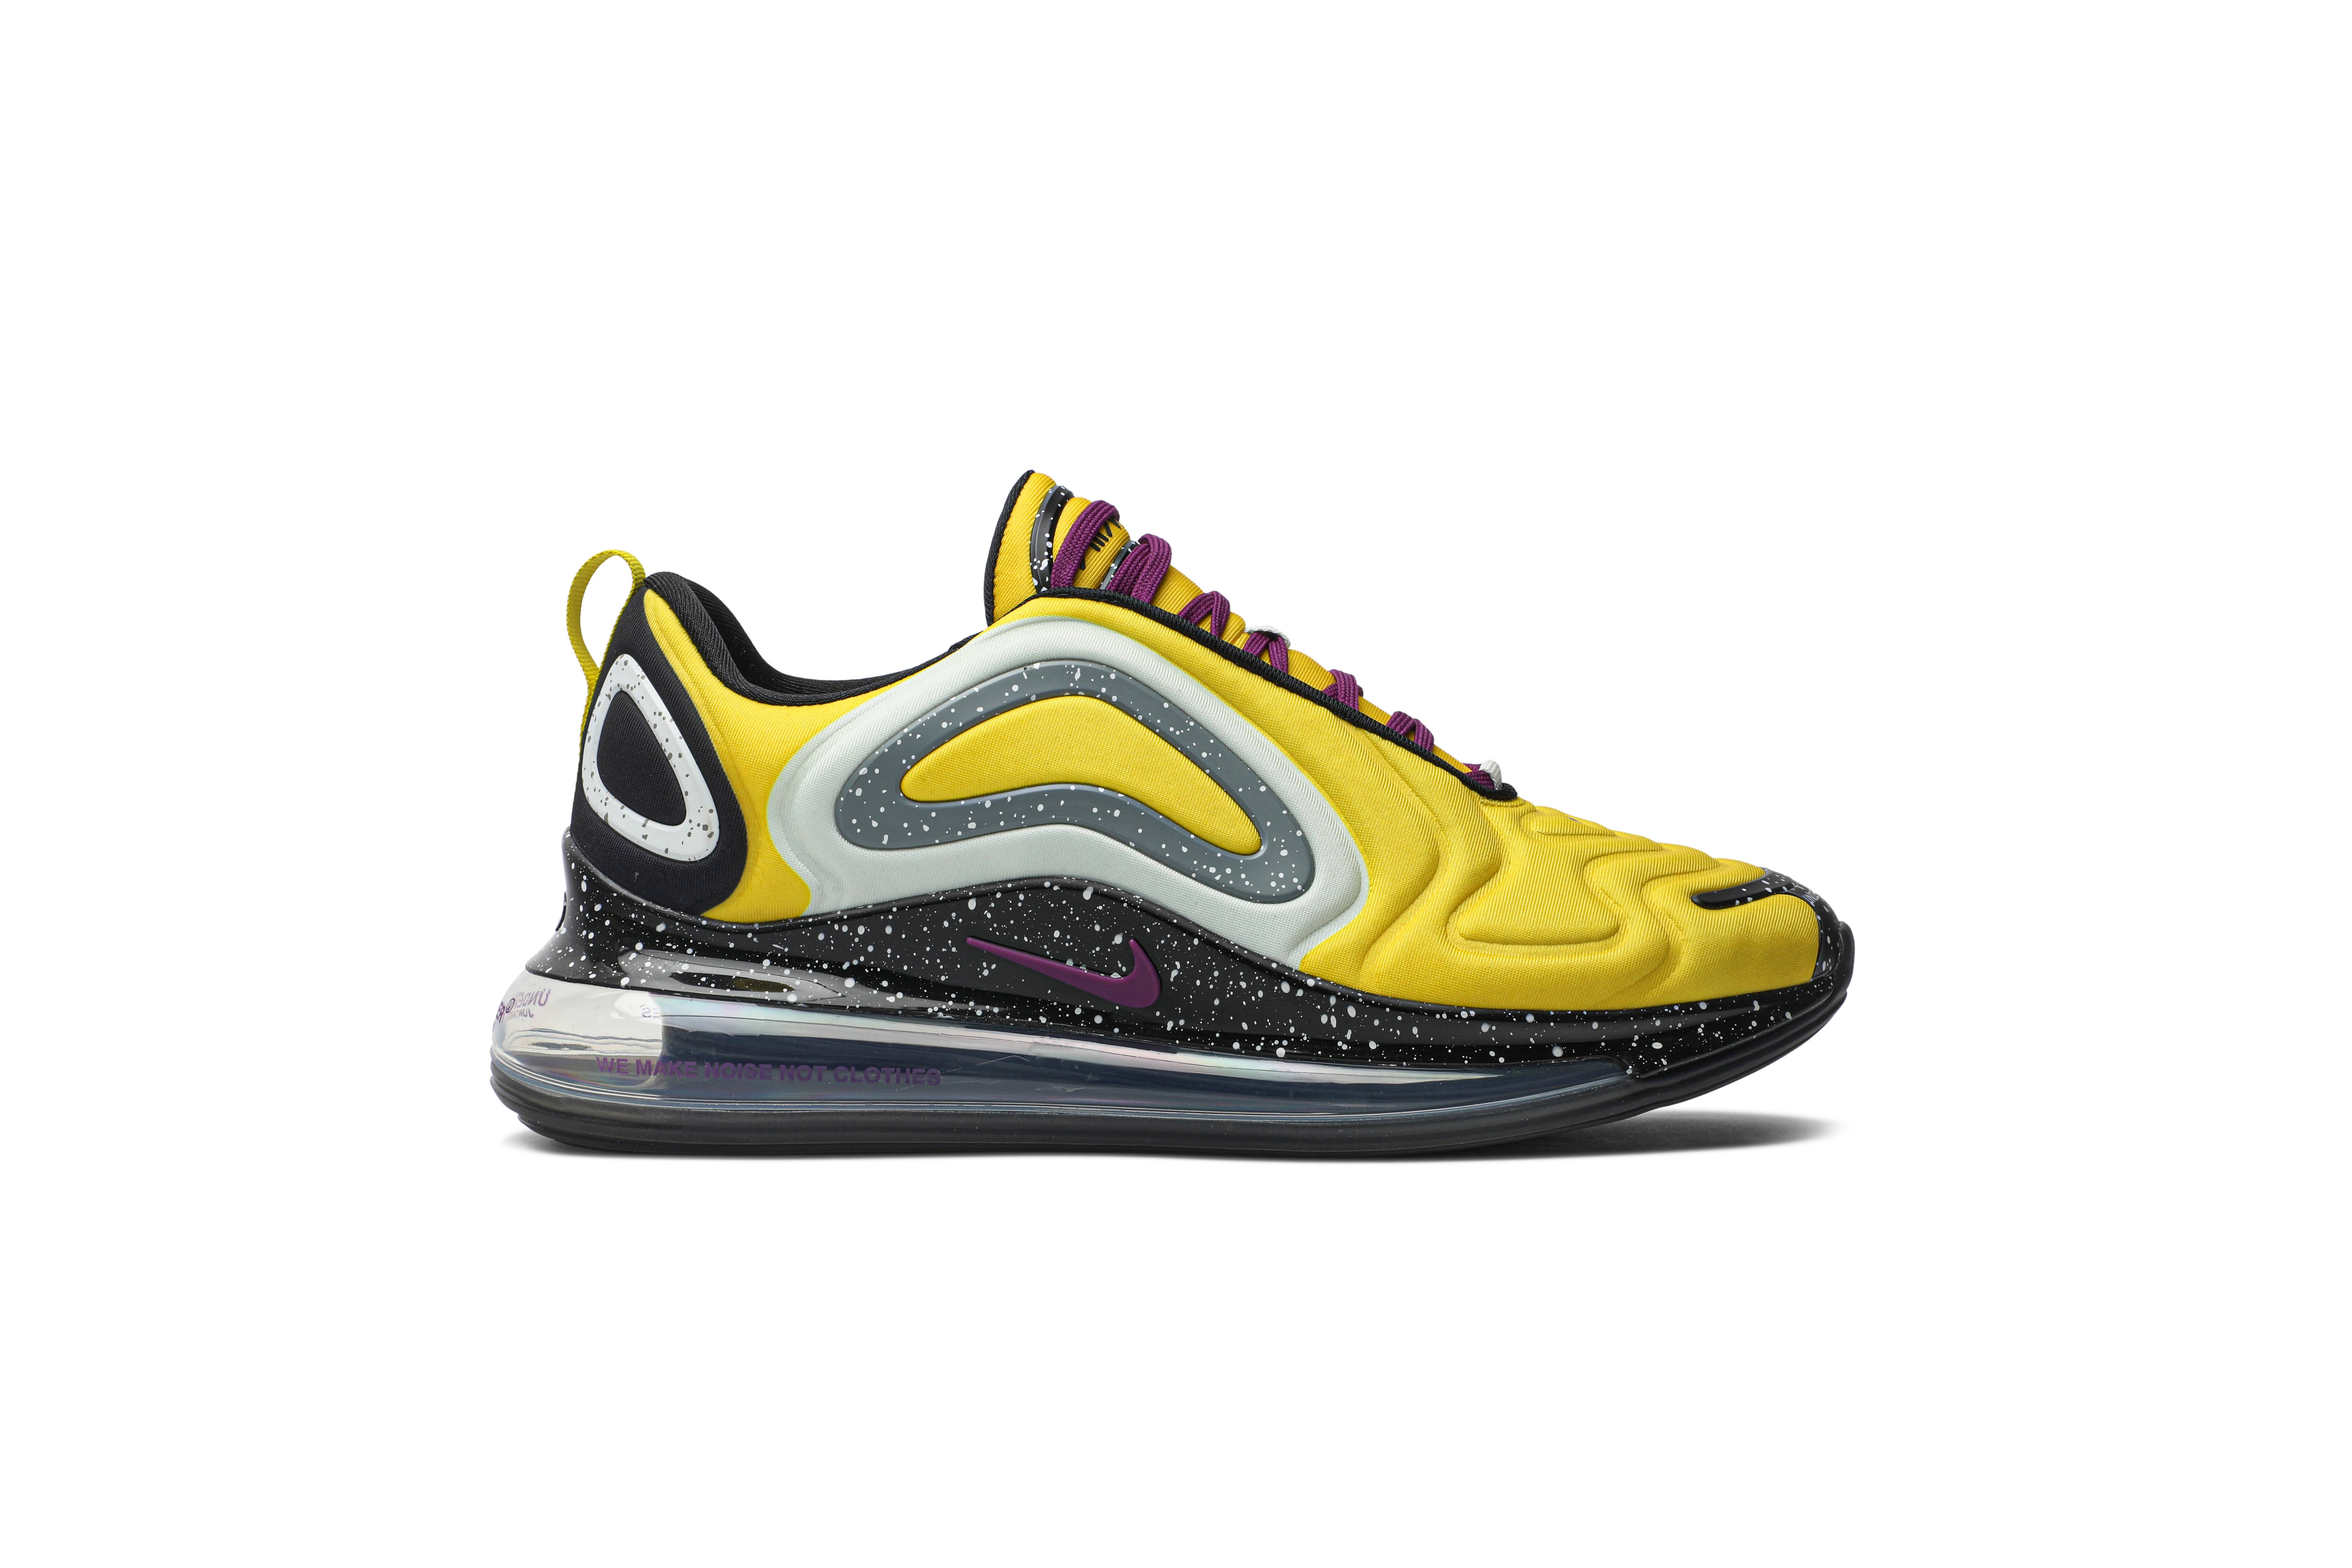 nike air max 720 undercover yellow